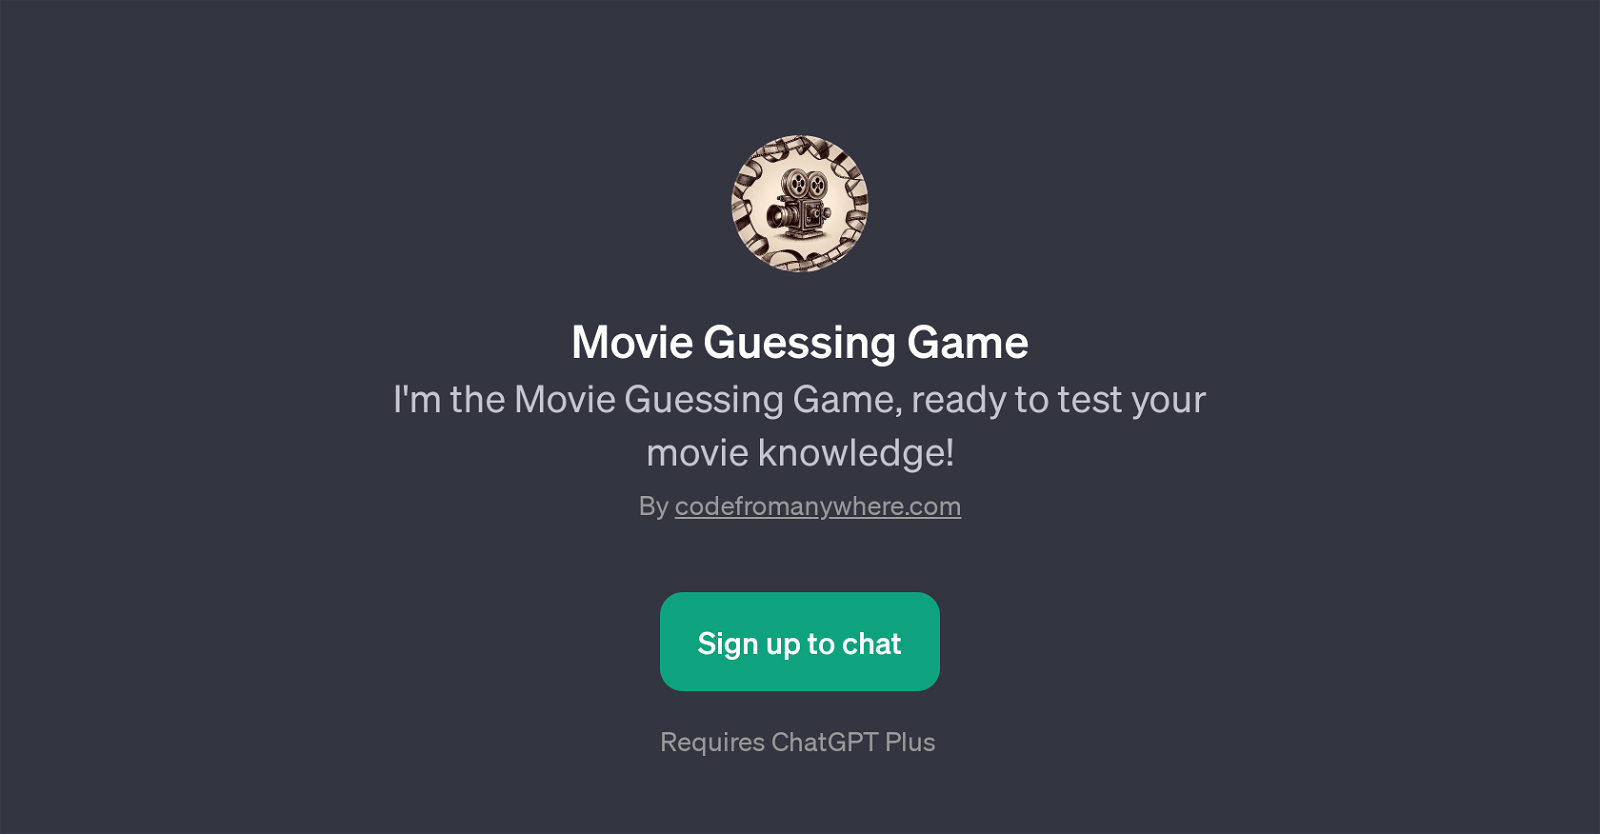 Movie Guessing Game website